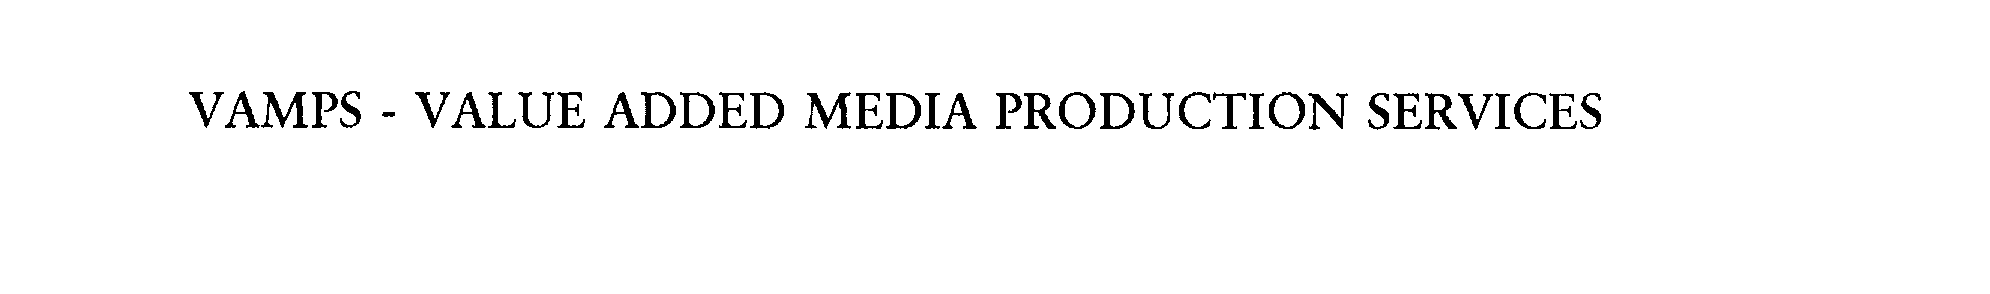  VAMPS - VALUE ADDED MEDIA PRODUCTION SERVICES